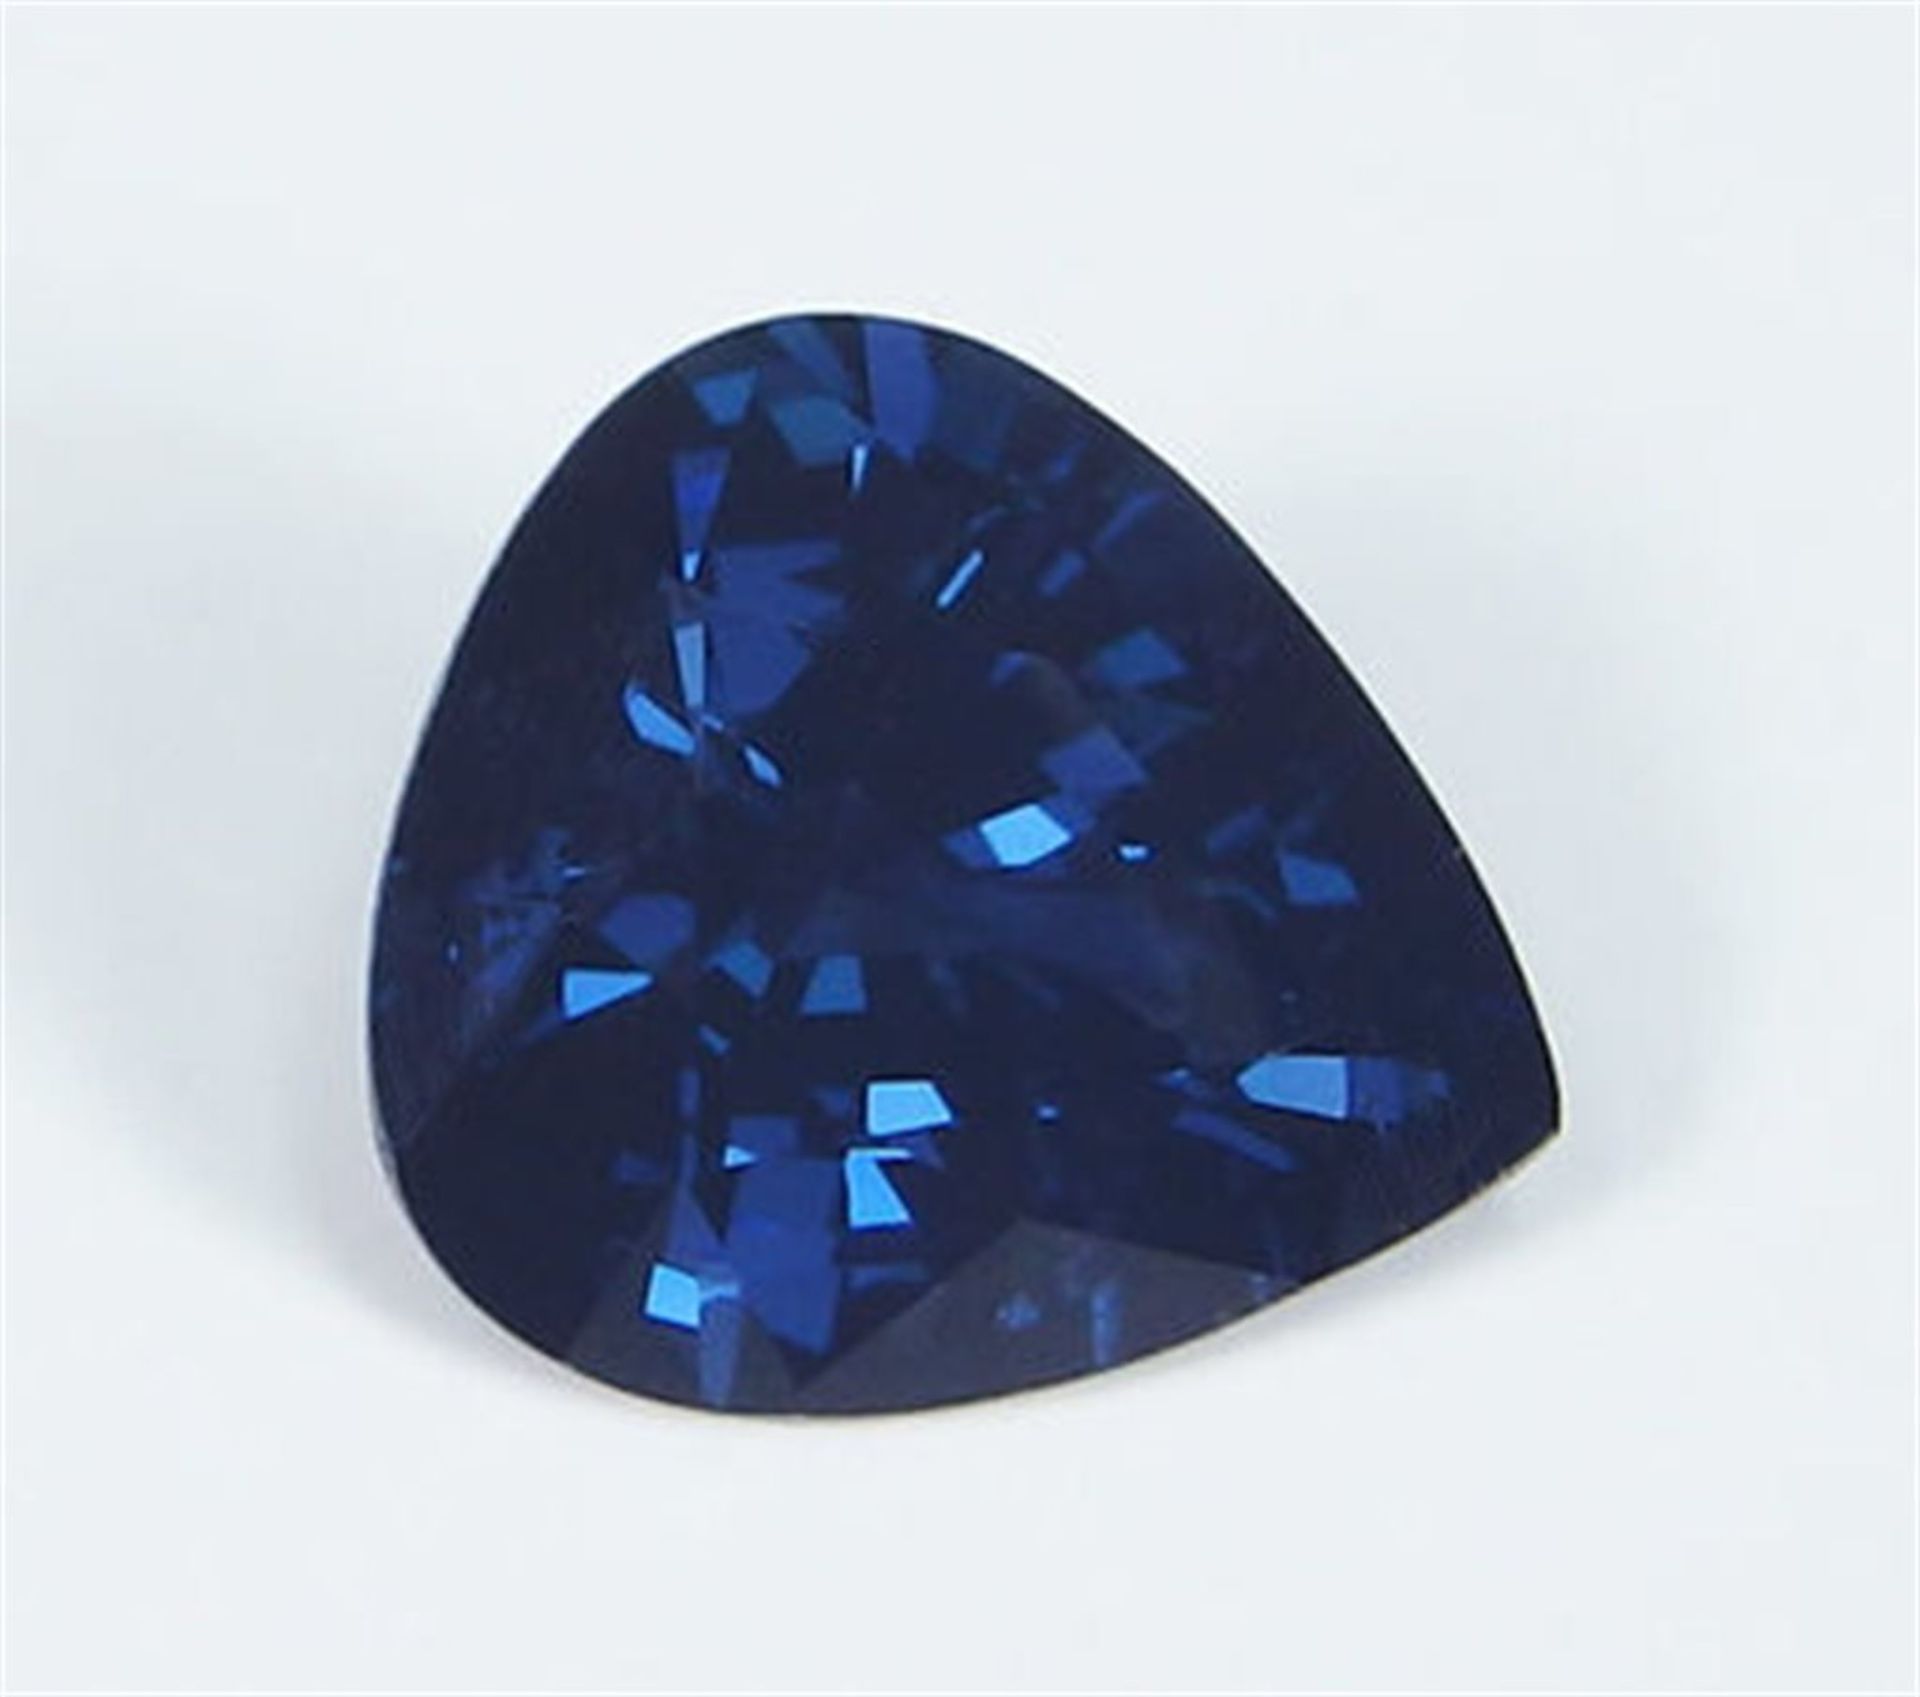 GIA Certified 3.35 ct. Dark Blue Spinel